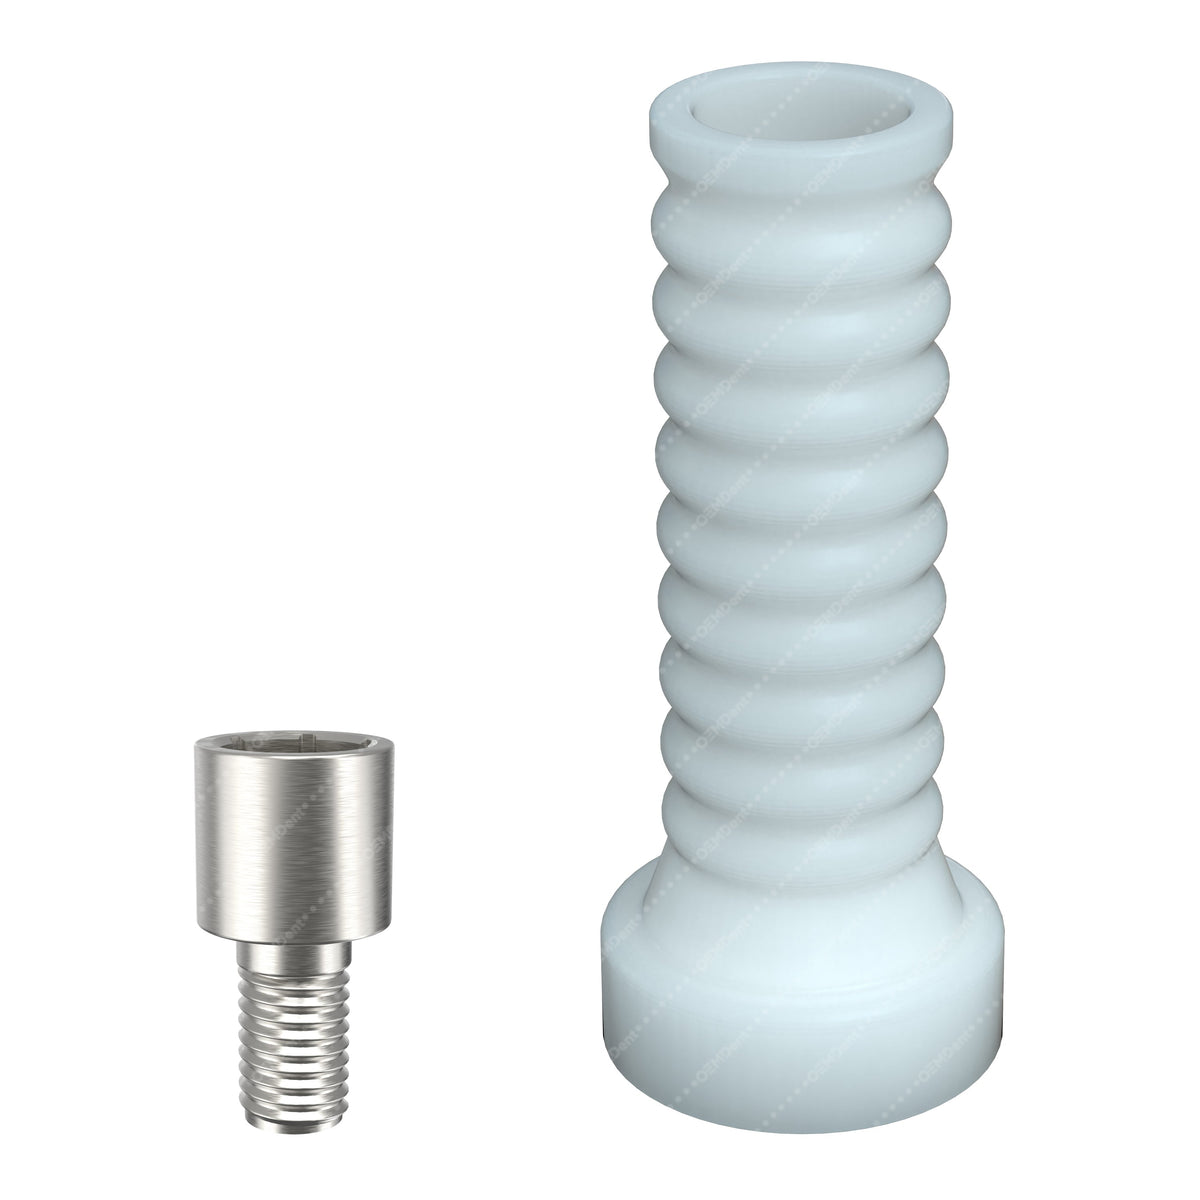 Plastic Cylinder For Multi Abutment - Noris Medical® Internal Hex Compatible